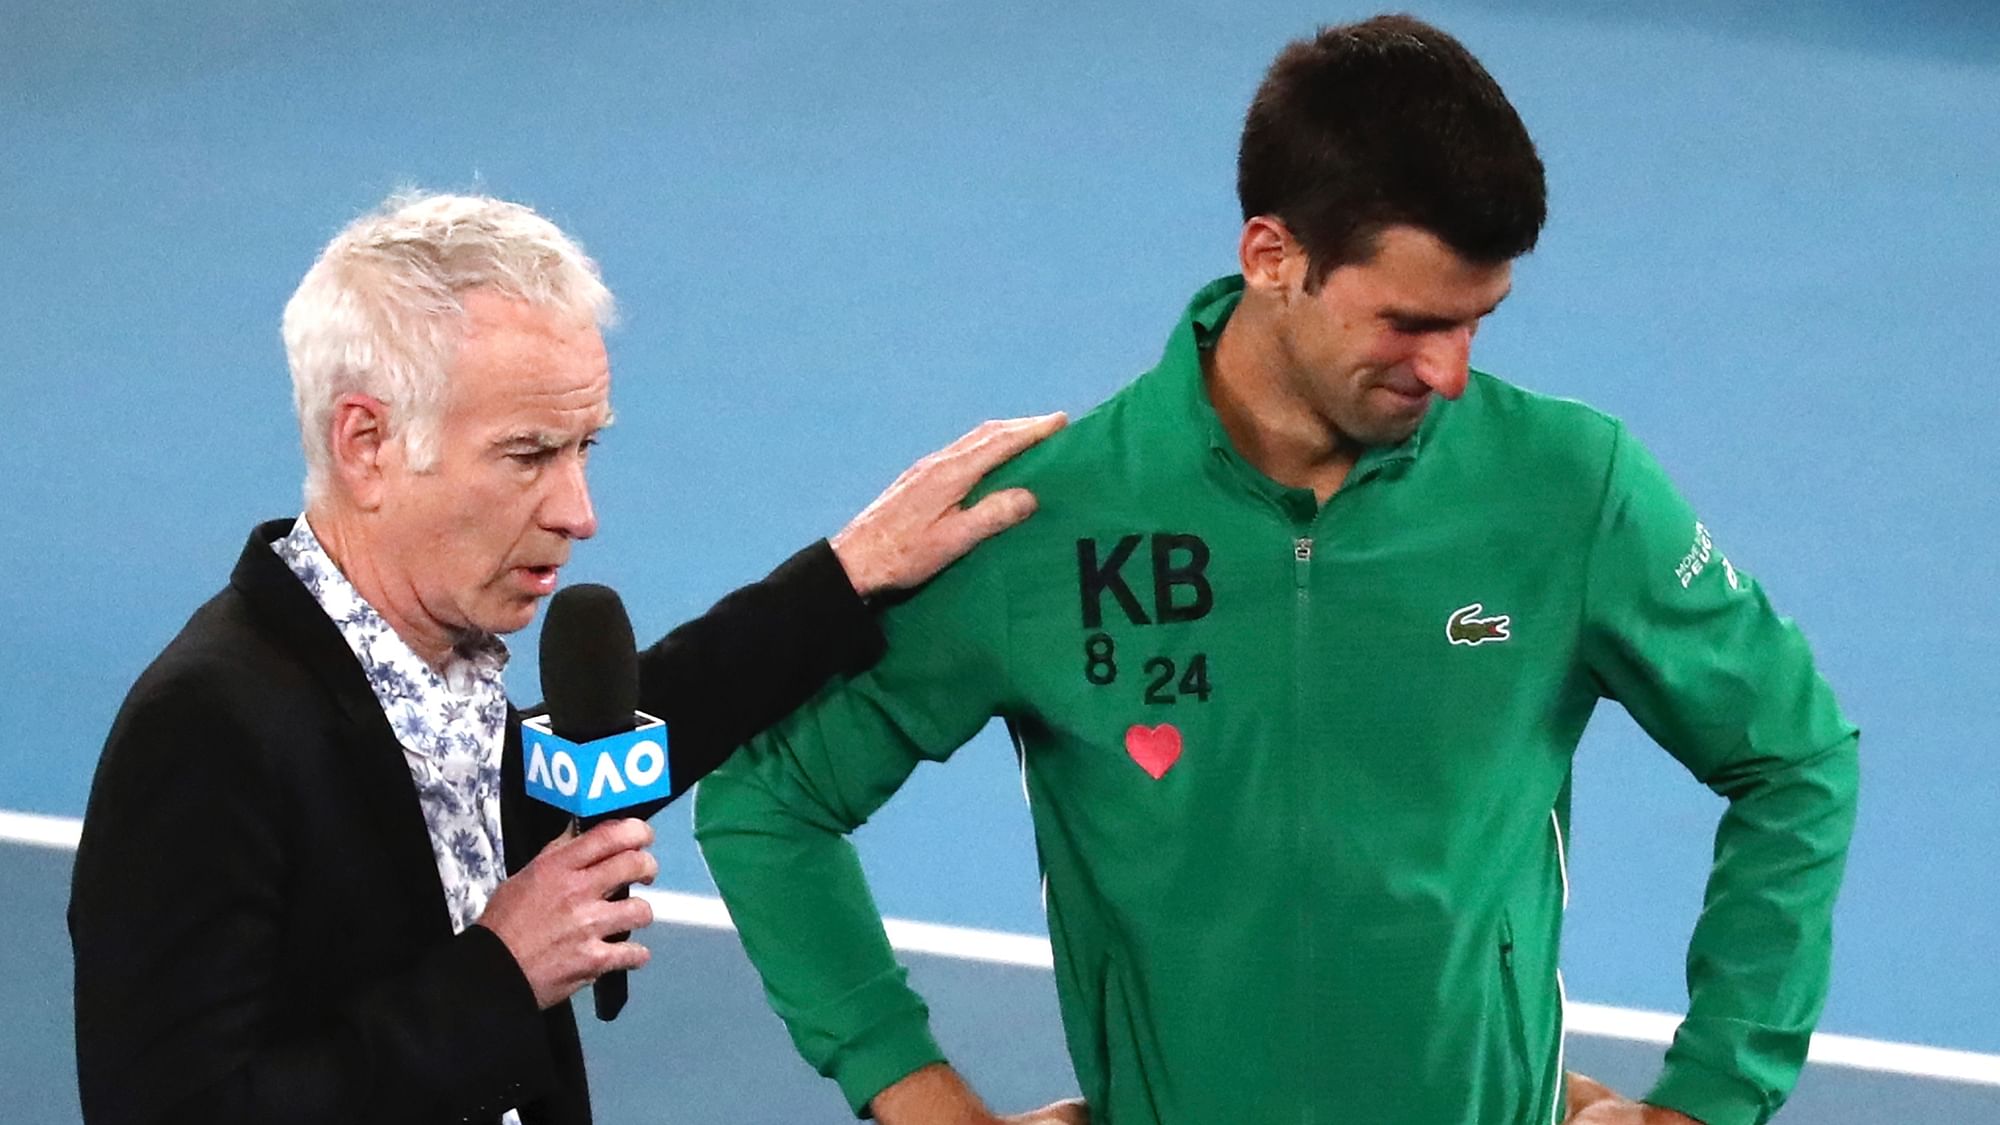 Serbian tennis great Novak Djokovic teared up on Tuesday, 28 January as he paid tribute to late basketball star Kobe Bryant, describing him as a “mentor” and a “friend” for the past 10 years.